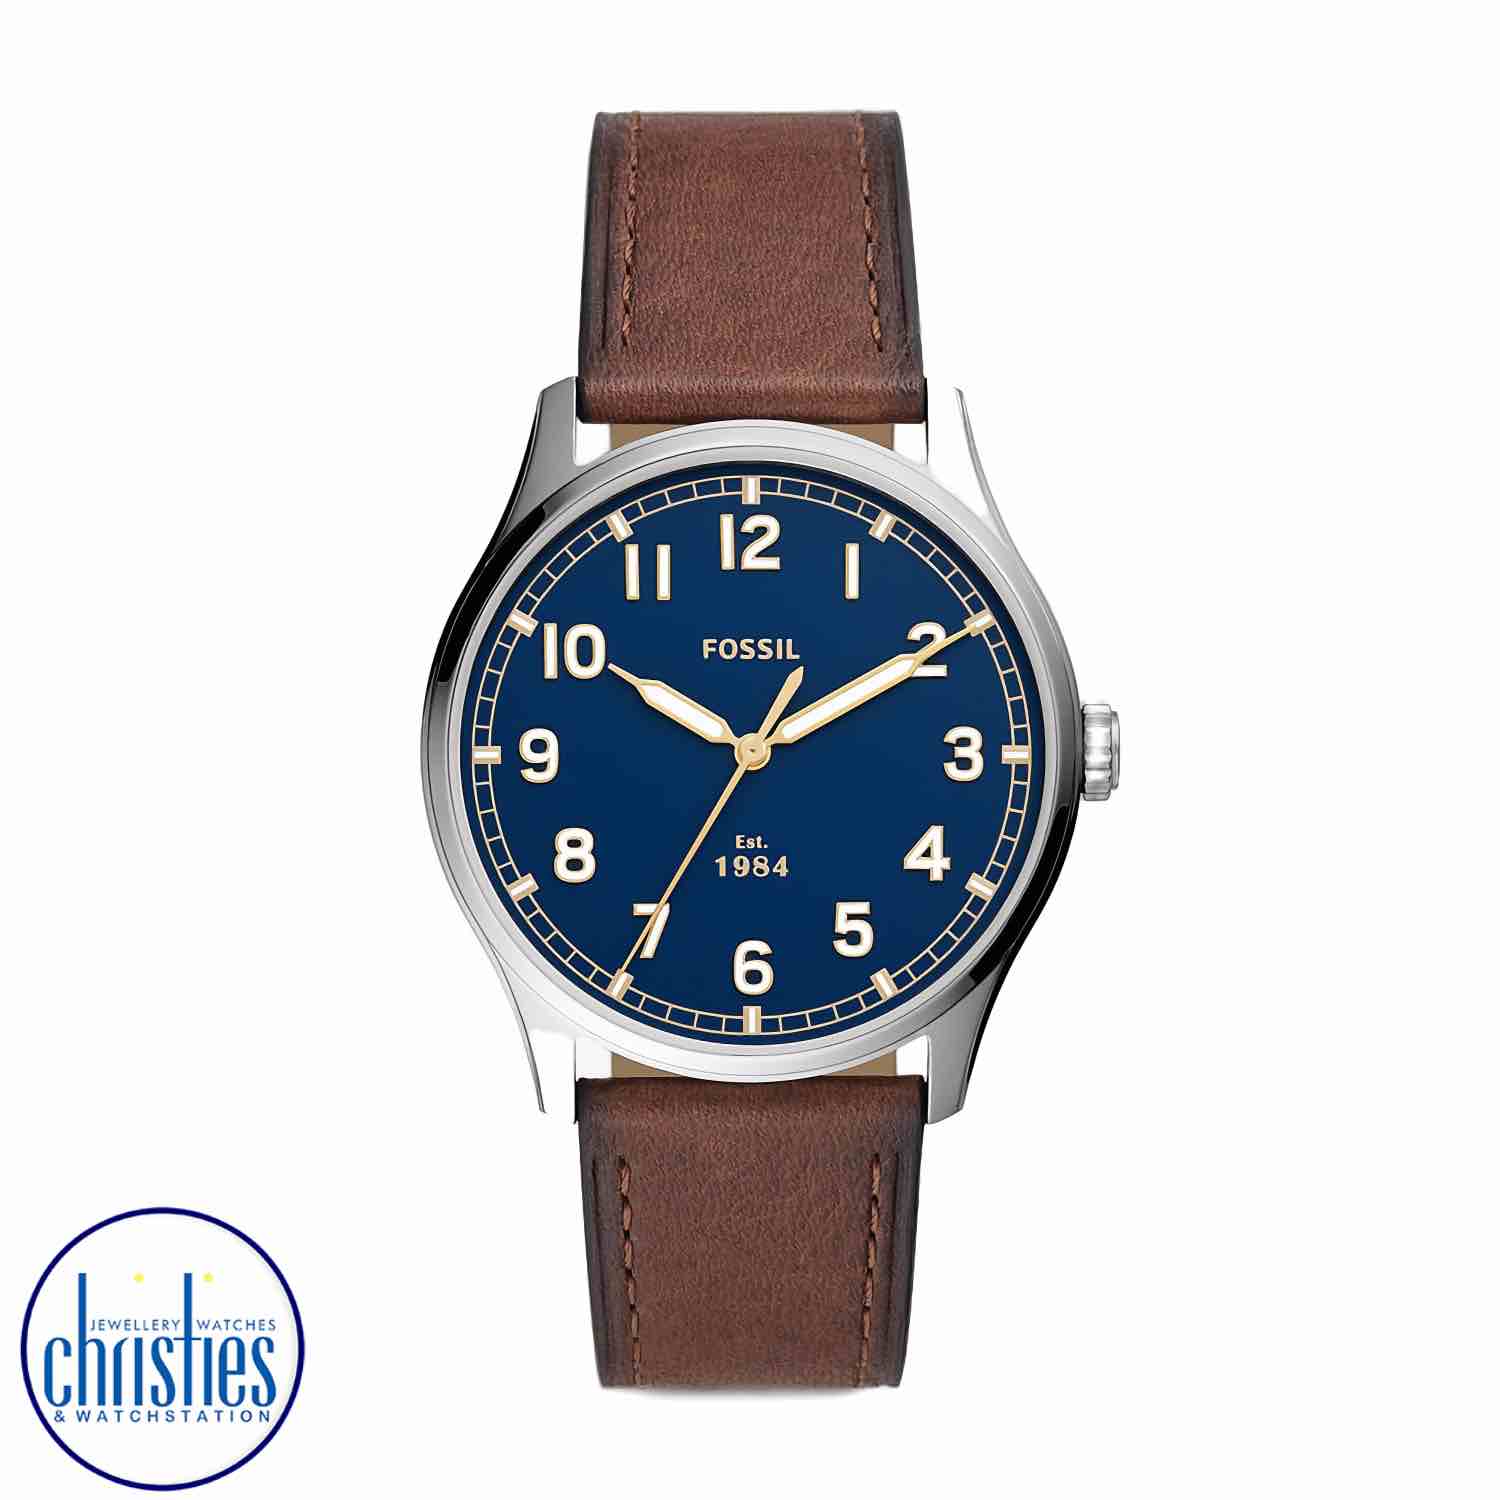 FS5923 Fossil Dayliner Three-Hand Medium Brown Leather Watch. FS5923 Fossil Dayliner Three-Hand Medium Brown Leather WatchAfterpay - Split your purchase into 4 instalments - Pay for your purchase over 4 instalments, due every two weeks. fossil mens watche